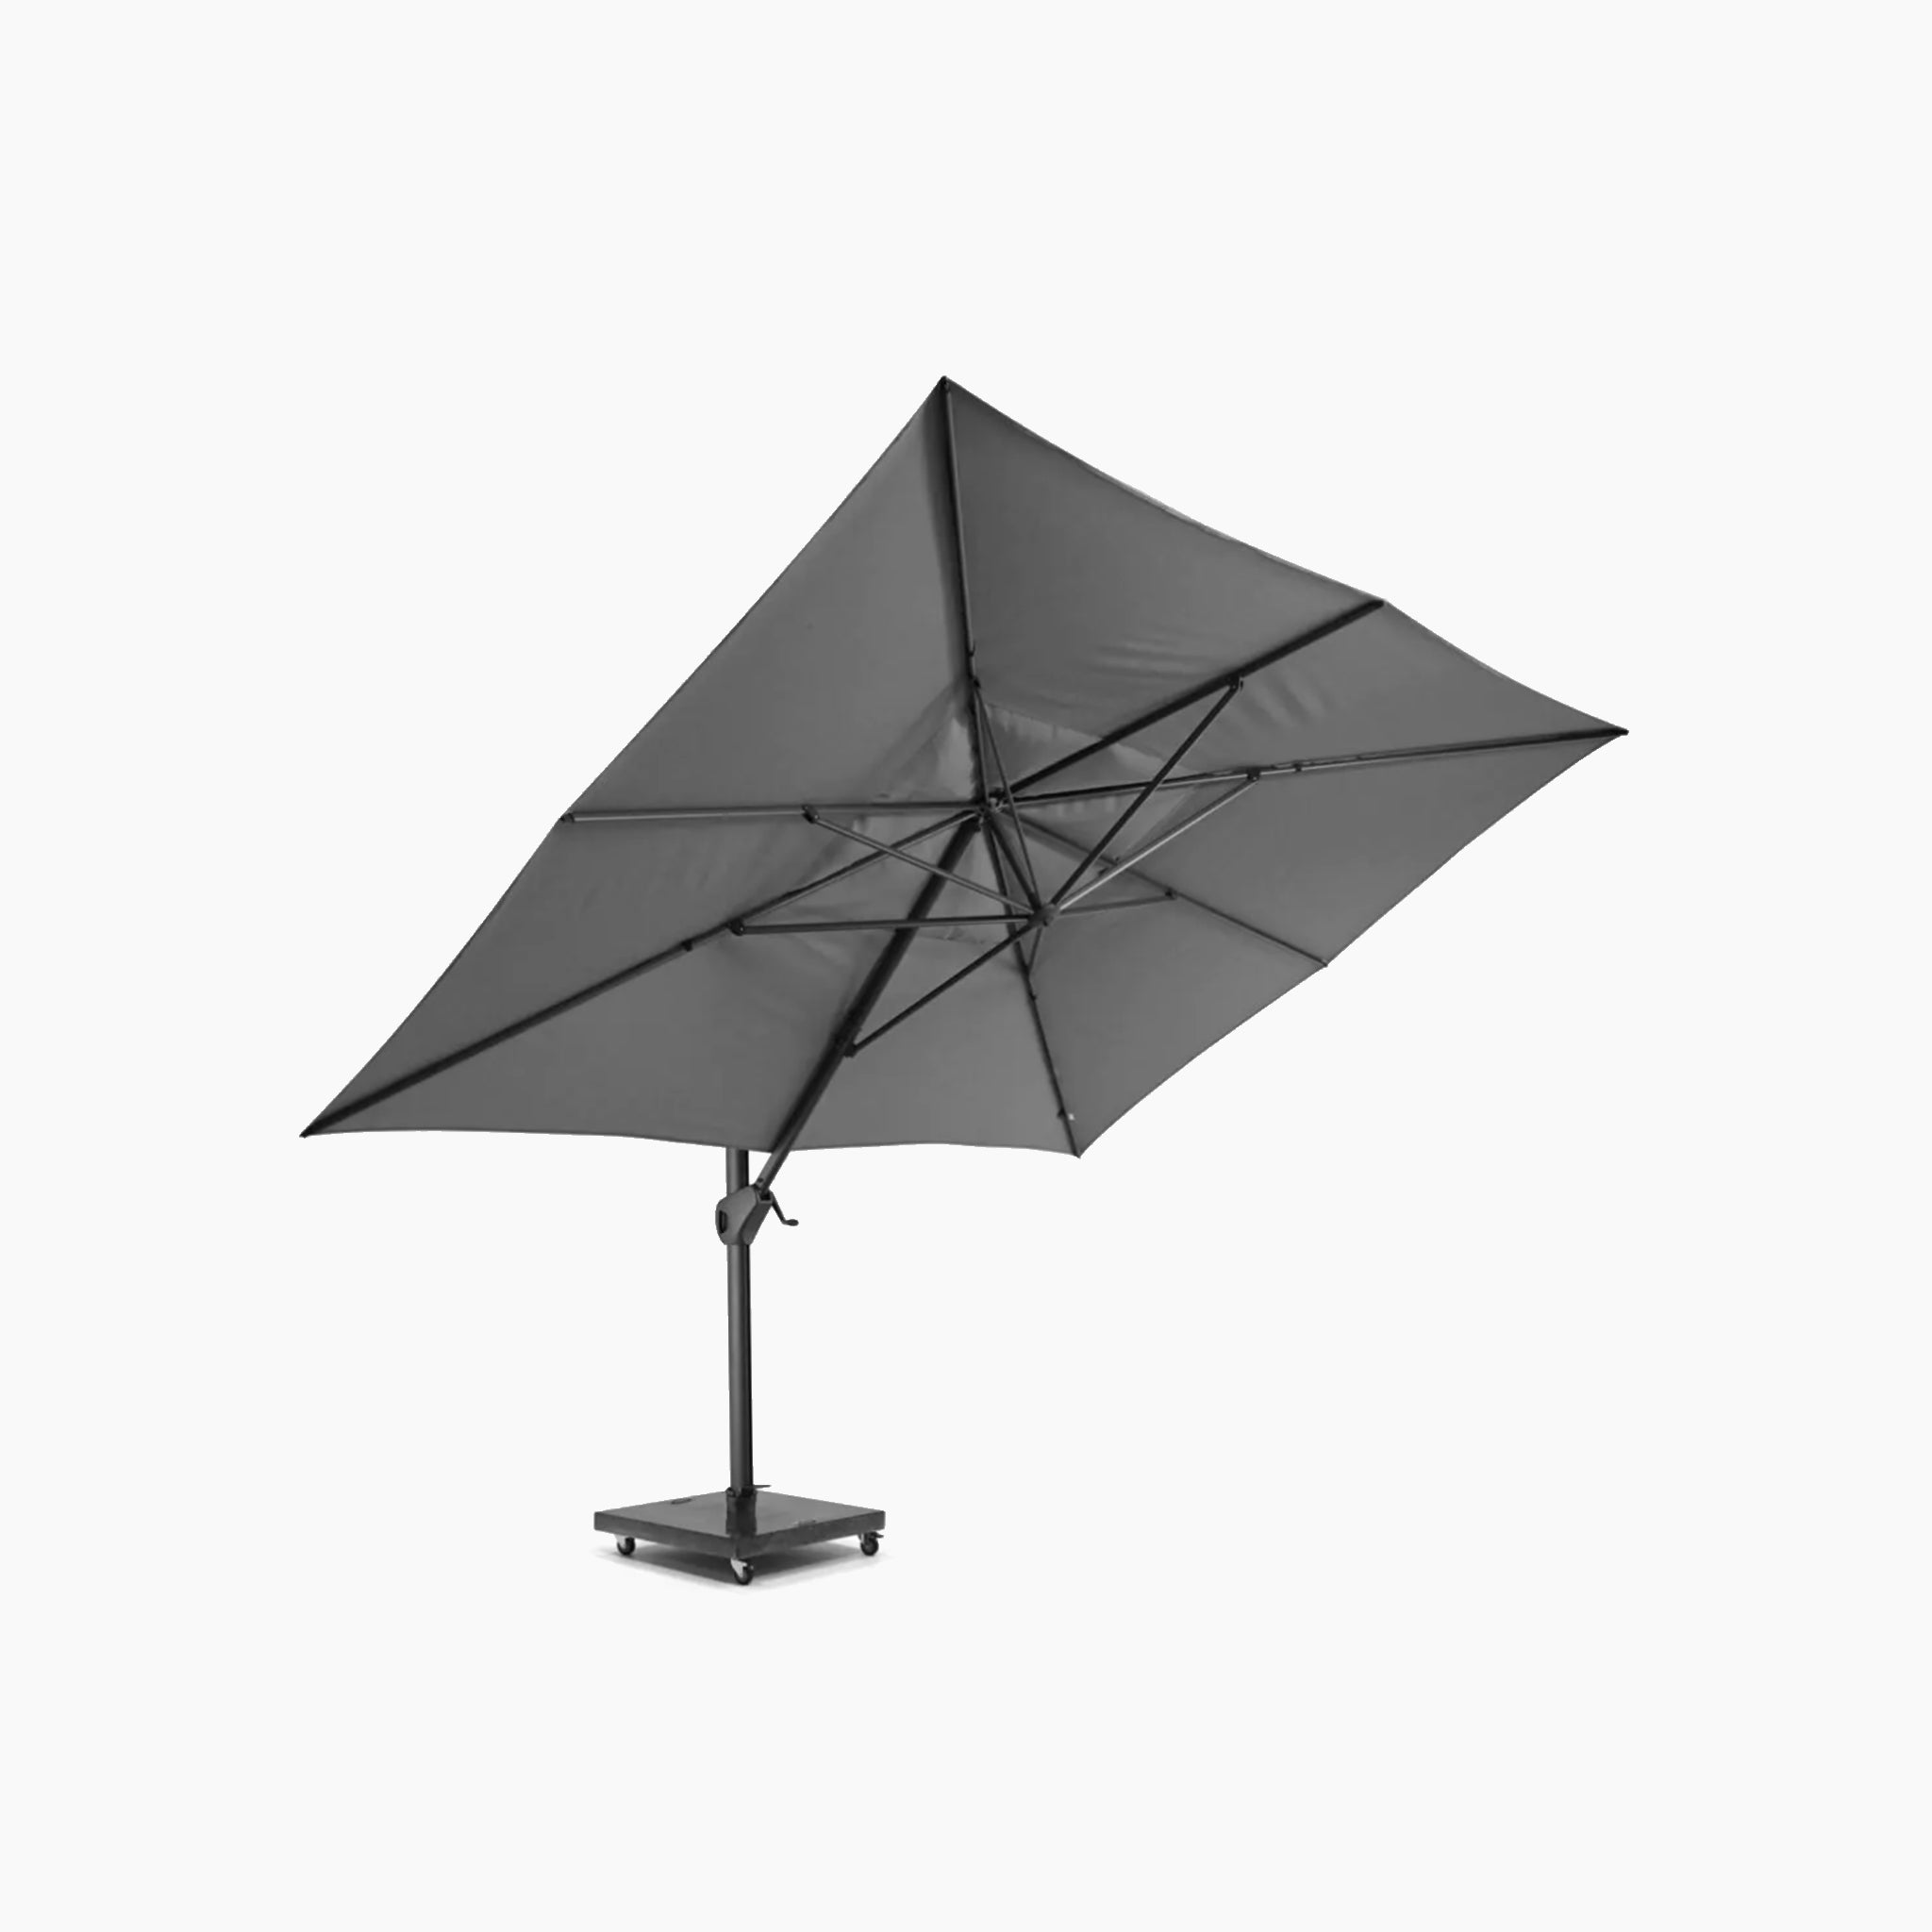 Hacienda 3m x 4m Cantilever Parasol With Granite Base & Cover in Charcoal